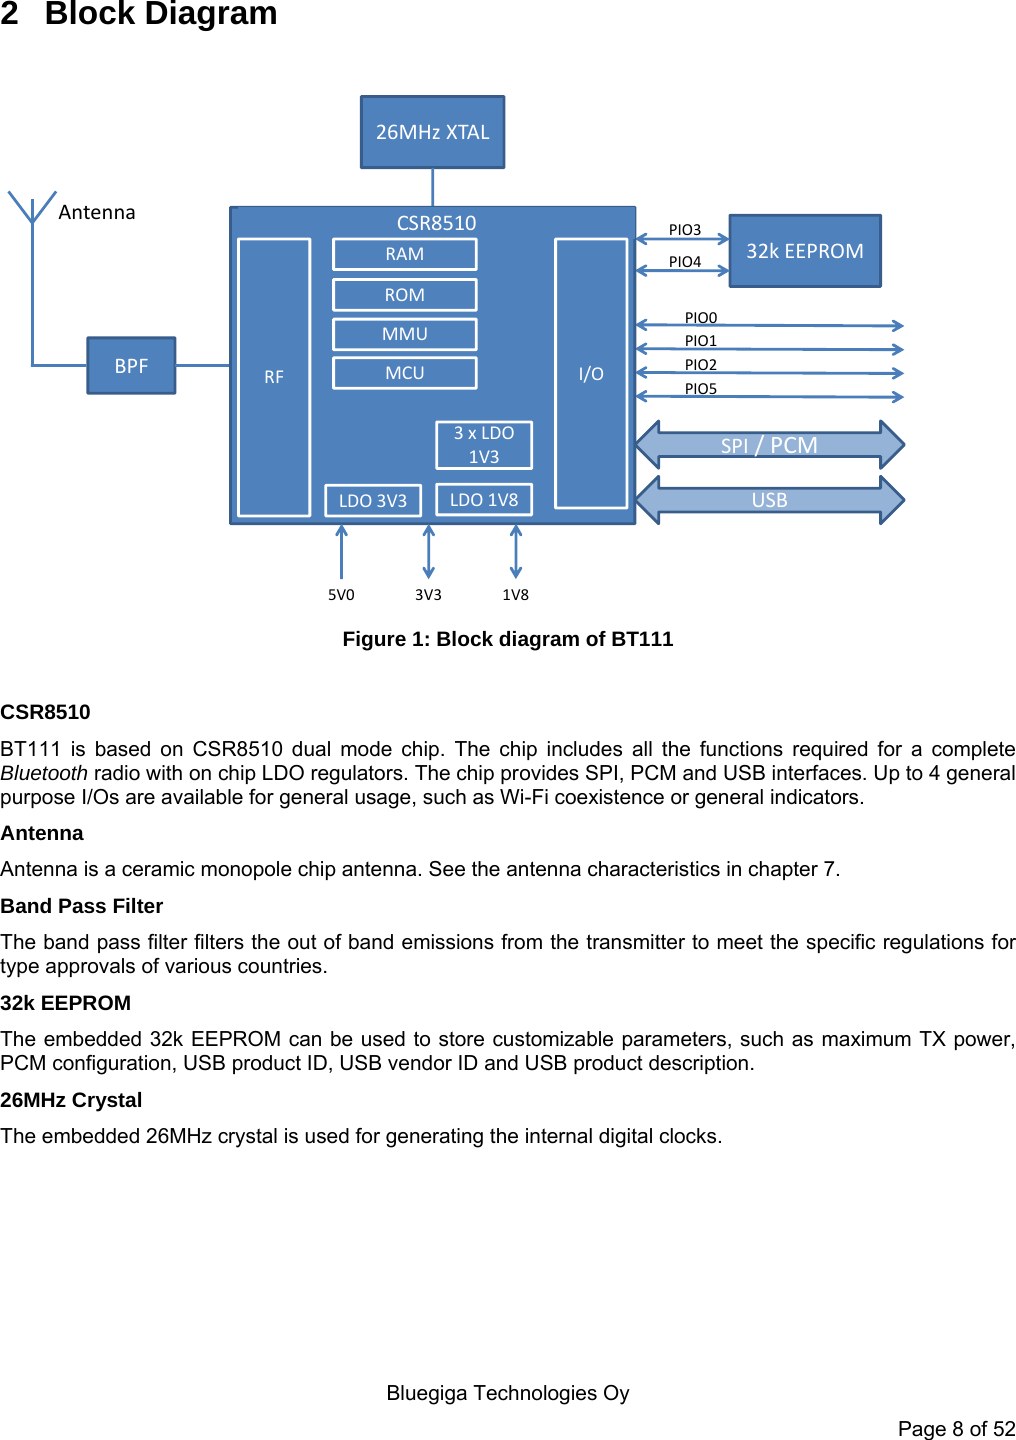    Bluegiga Technologies Oy Page 8 of 52 2 Block Diagram  32k EEPROMPIO3PIO426MHz XTALBPFAntennaPIO0PIO1PIO2PIO5SPI / PCMUSBCSR8510RFRAMROMMMUMCU I/OLDO 3V3 LDO 1V83 x LDO 1V35V0 3V3 1V8 Figure 1: Block diagram of BT111  CSR8510 BT111 is based on CSR8510 dual mode chip. The chip includes all the functions required for a complete Bluetooth radio with on chip LDO regulators. The chip provides SPI, PCM and USB interfaces. Up to 4 general purpose I/Os are available for general usage, such as Wi-Fi coexistence or general indicators. Antenna Antenna is a ceramic monopole chip antenna. See the antenna characteristics in chapter 7. Band Pass Filter The band pass filter filters the out of band emissions from the transmitter to meet the specific regulations for type approvals of various countries. 32k EEPROM The embedded 32k EEPROM can be used to store customizable parameters, such as maximum TX power, PCM configuration, USB product ID, USB vendor ID and USB product description.   26MHz Crystal The embedded 26MHz crystal is used for generating the internal digital clocks. 